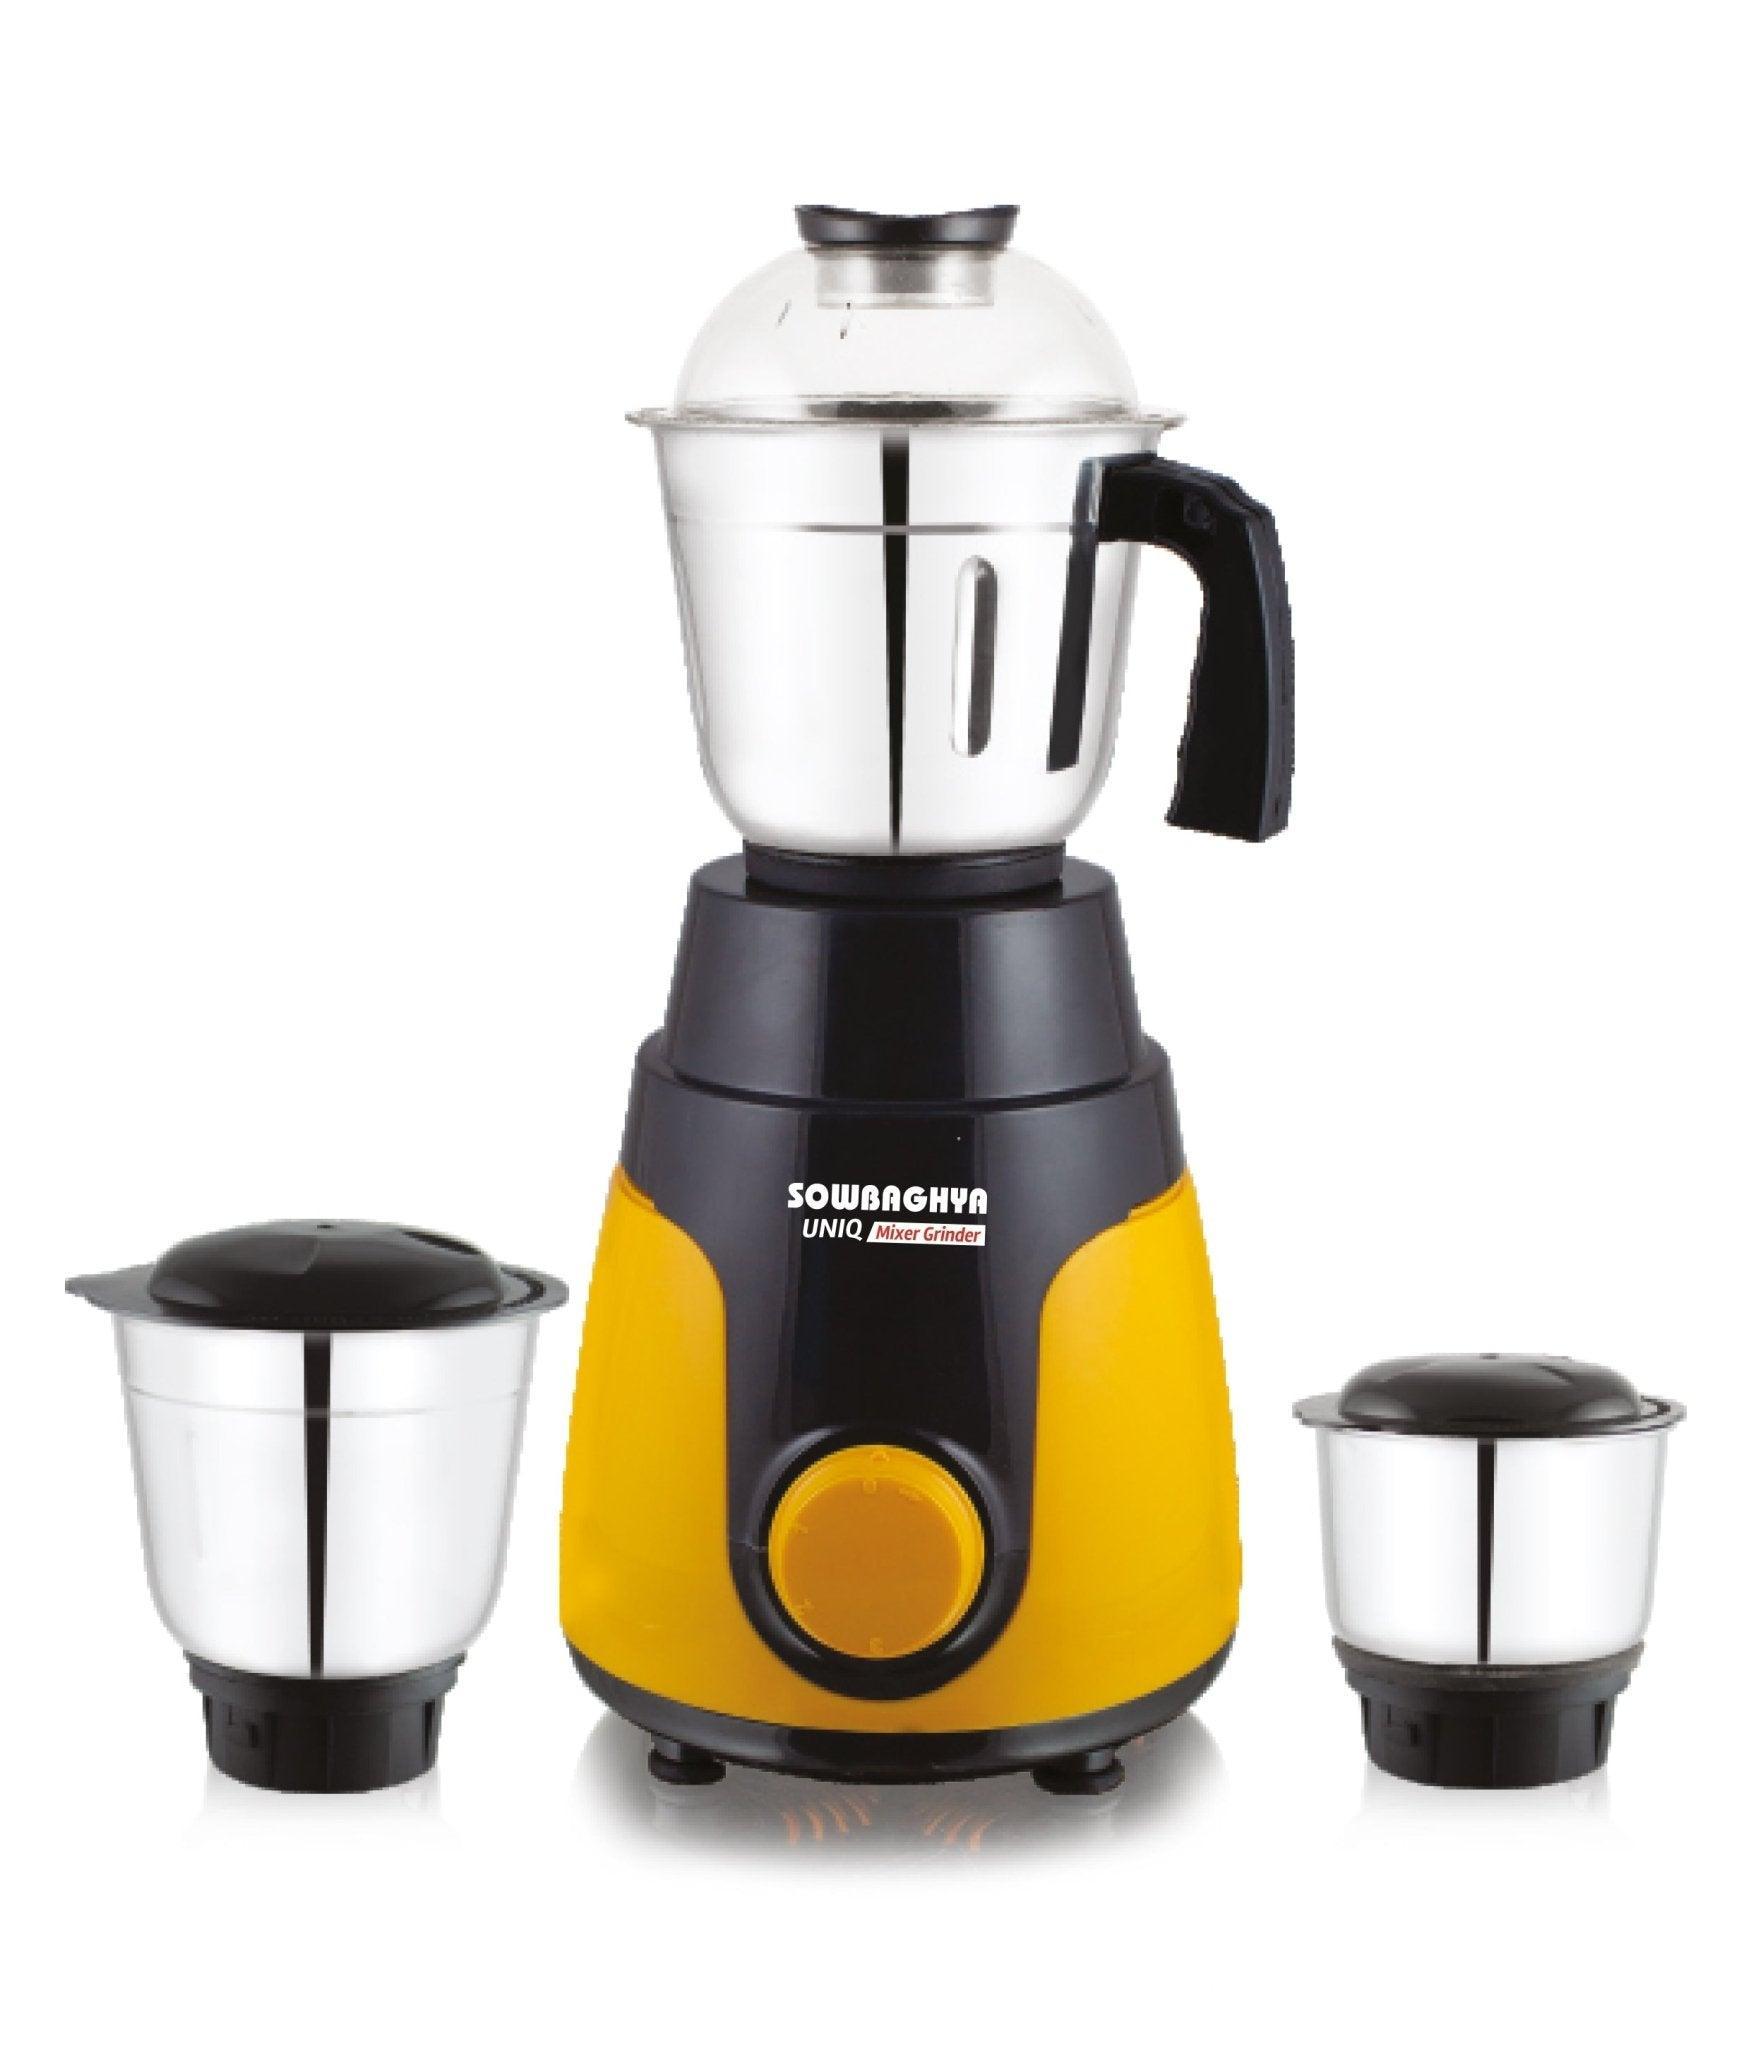 Uniq 500Watts Mixer Grinder (Black with Yellow) - SOWBAGHYA